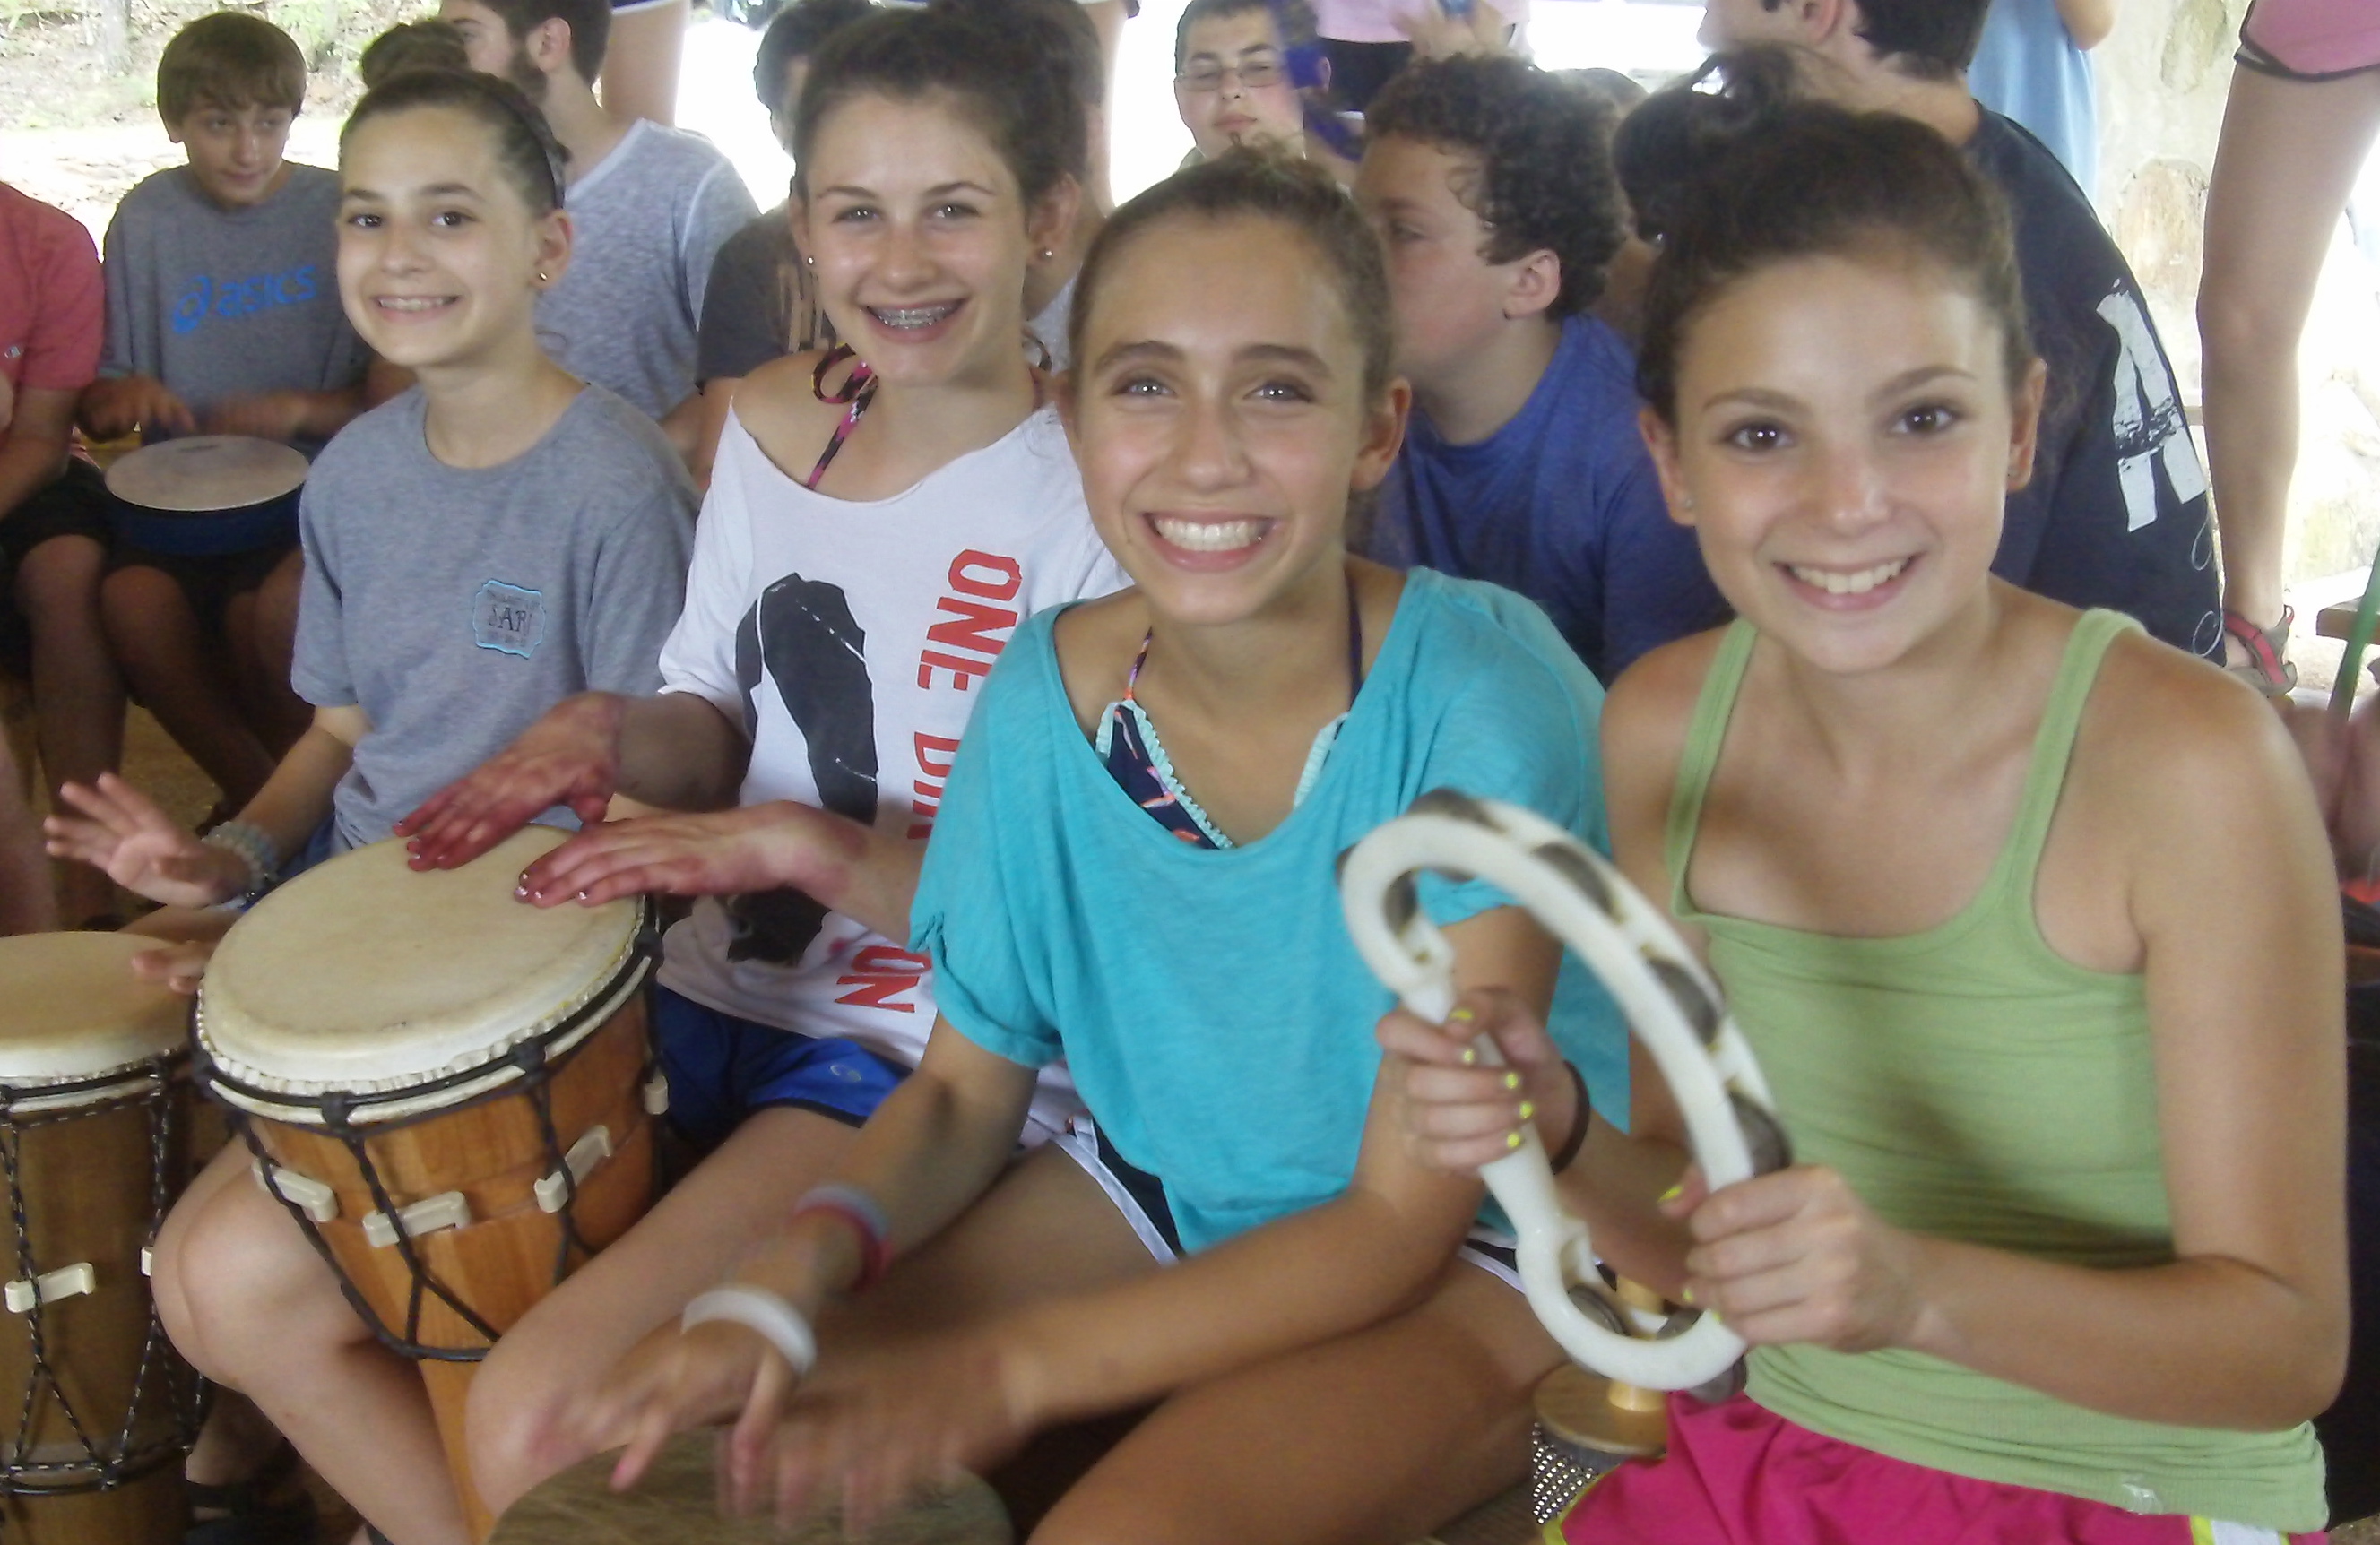 With a drum circle, a festival performance becomes a celebration of cooperation and community with an interactive program.